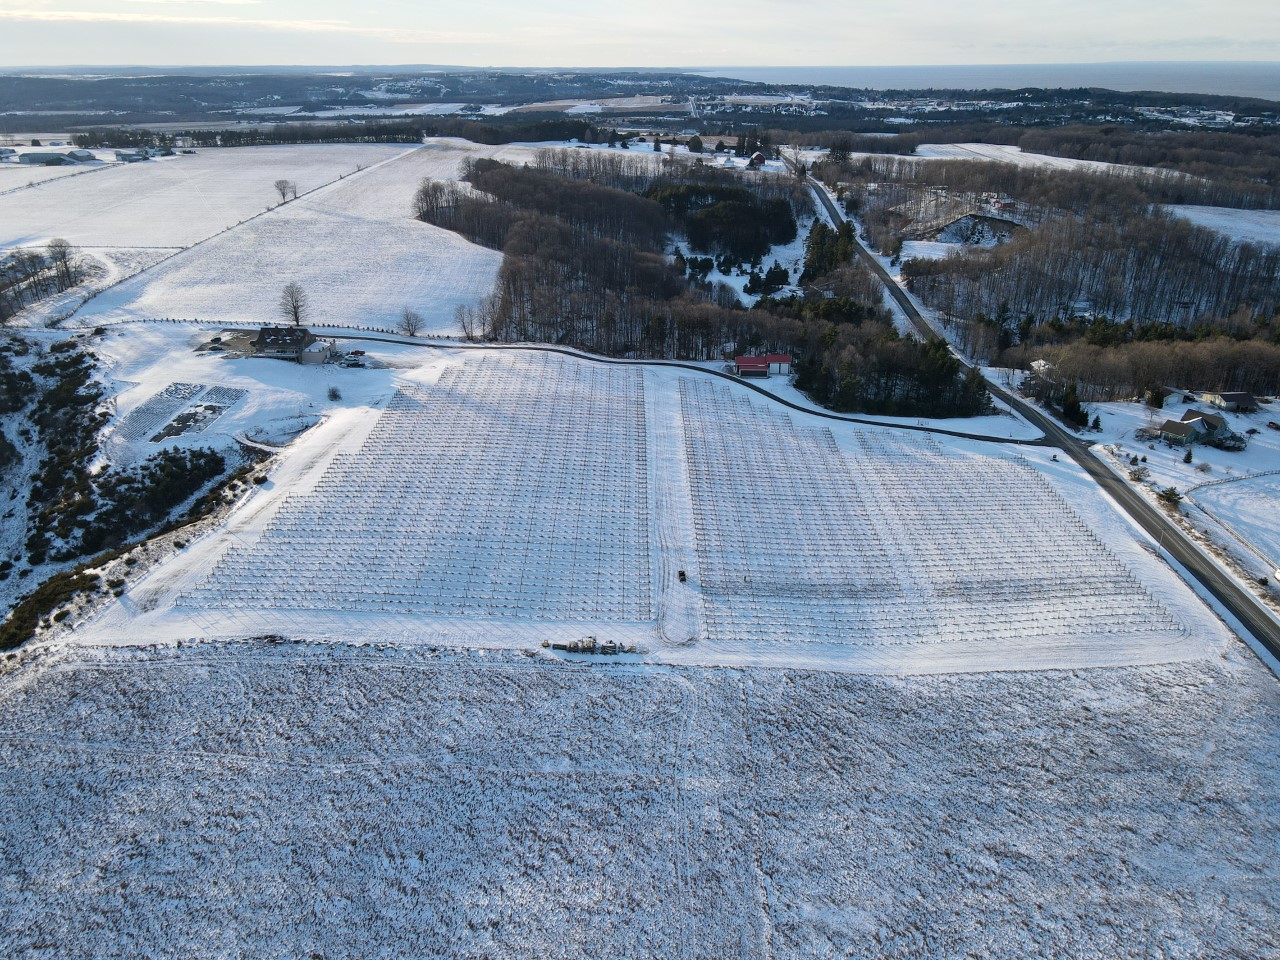 A drone photo of the vineyard and winery in the winter.